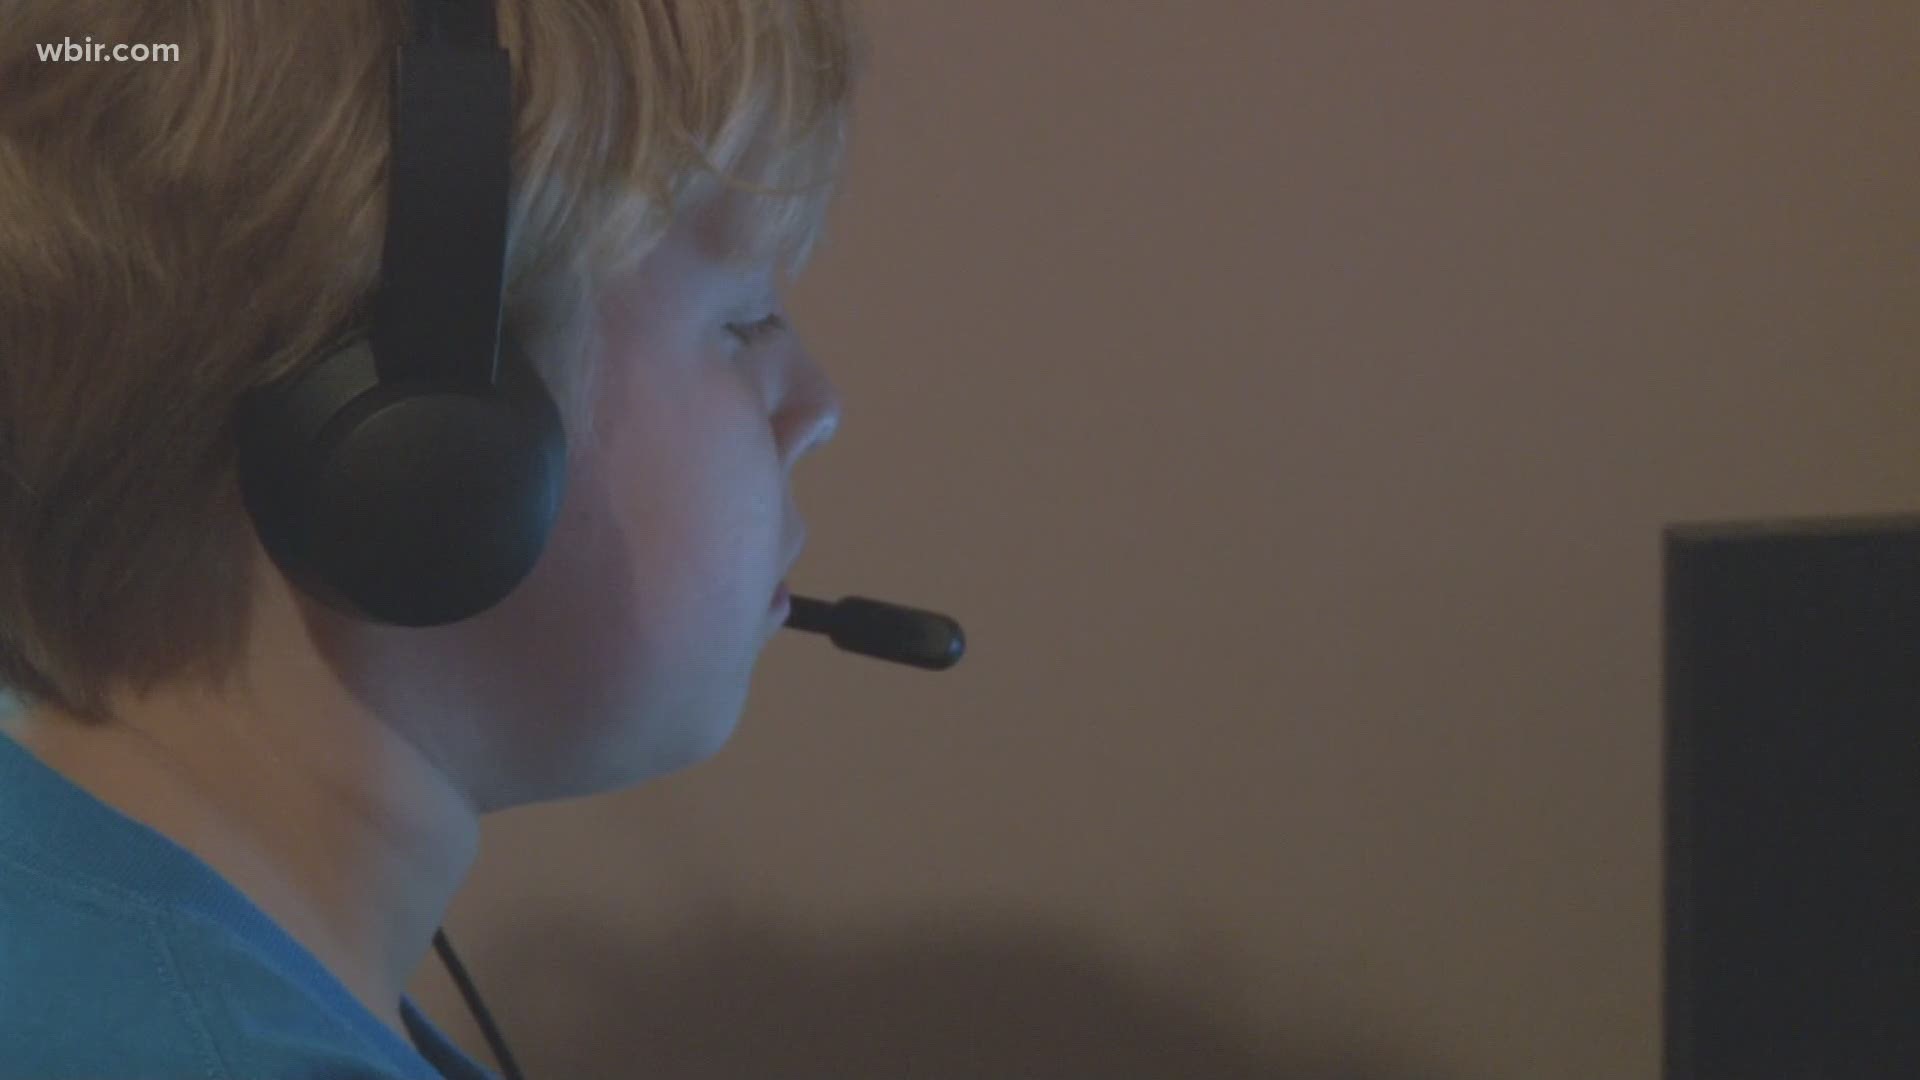 Reporter Cole Sullivan looks at how day one went for students taking virtual lessons in Knox County.